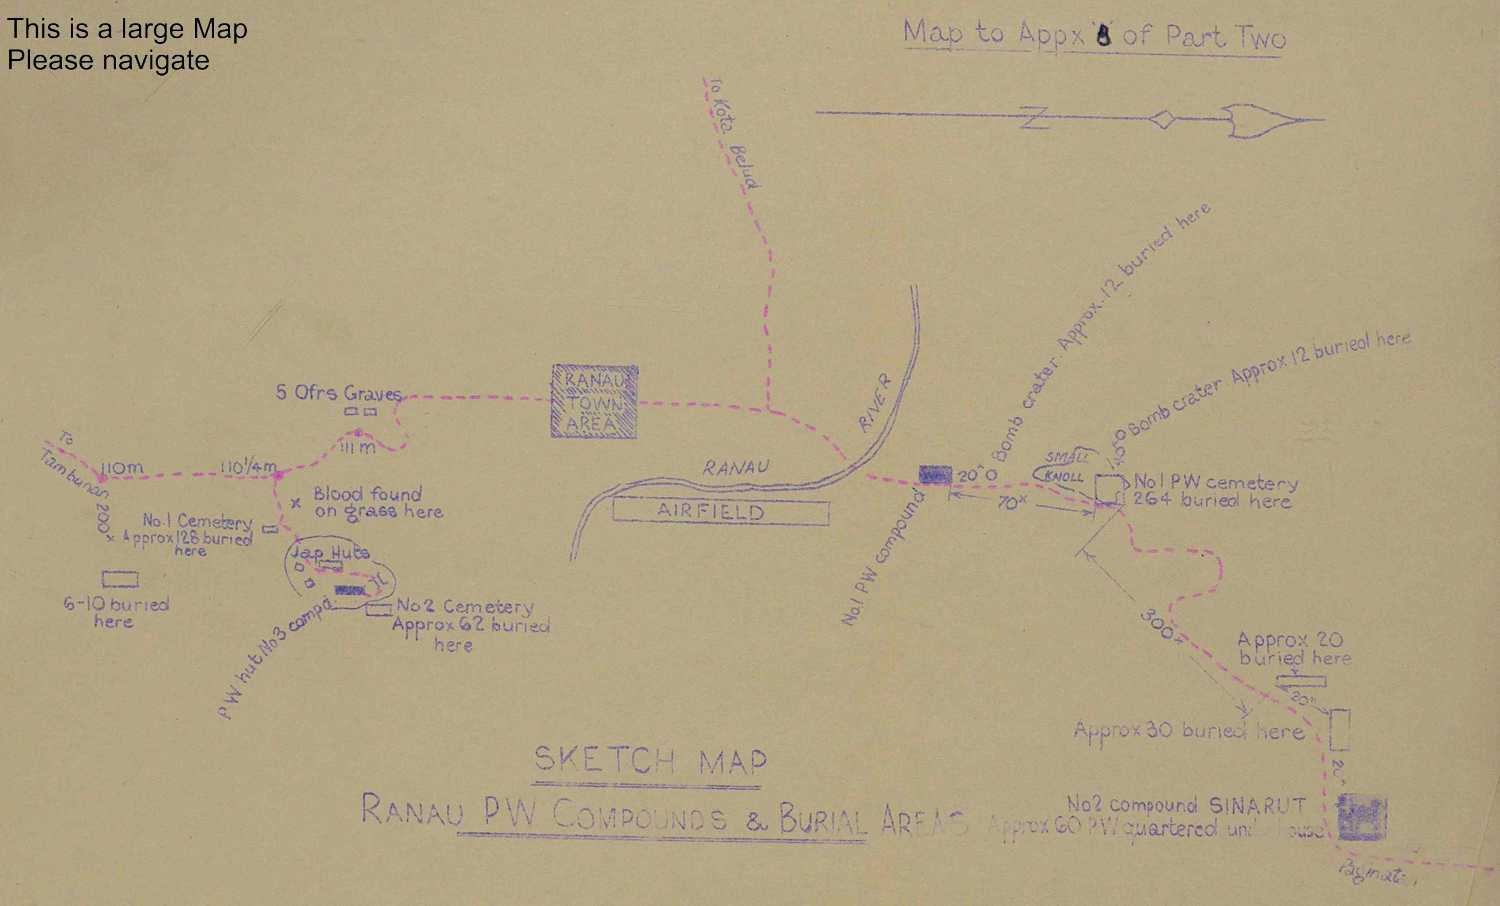 Ranau PoW Compounds and Burial Areas-1